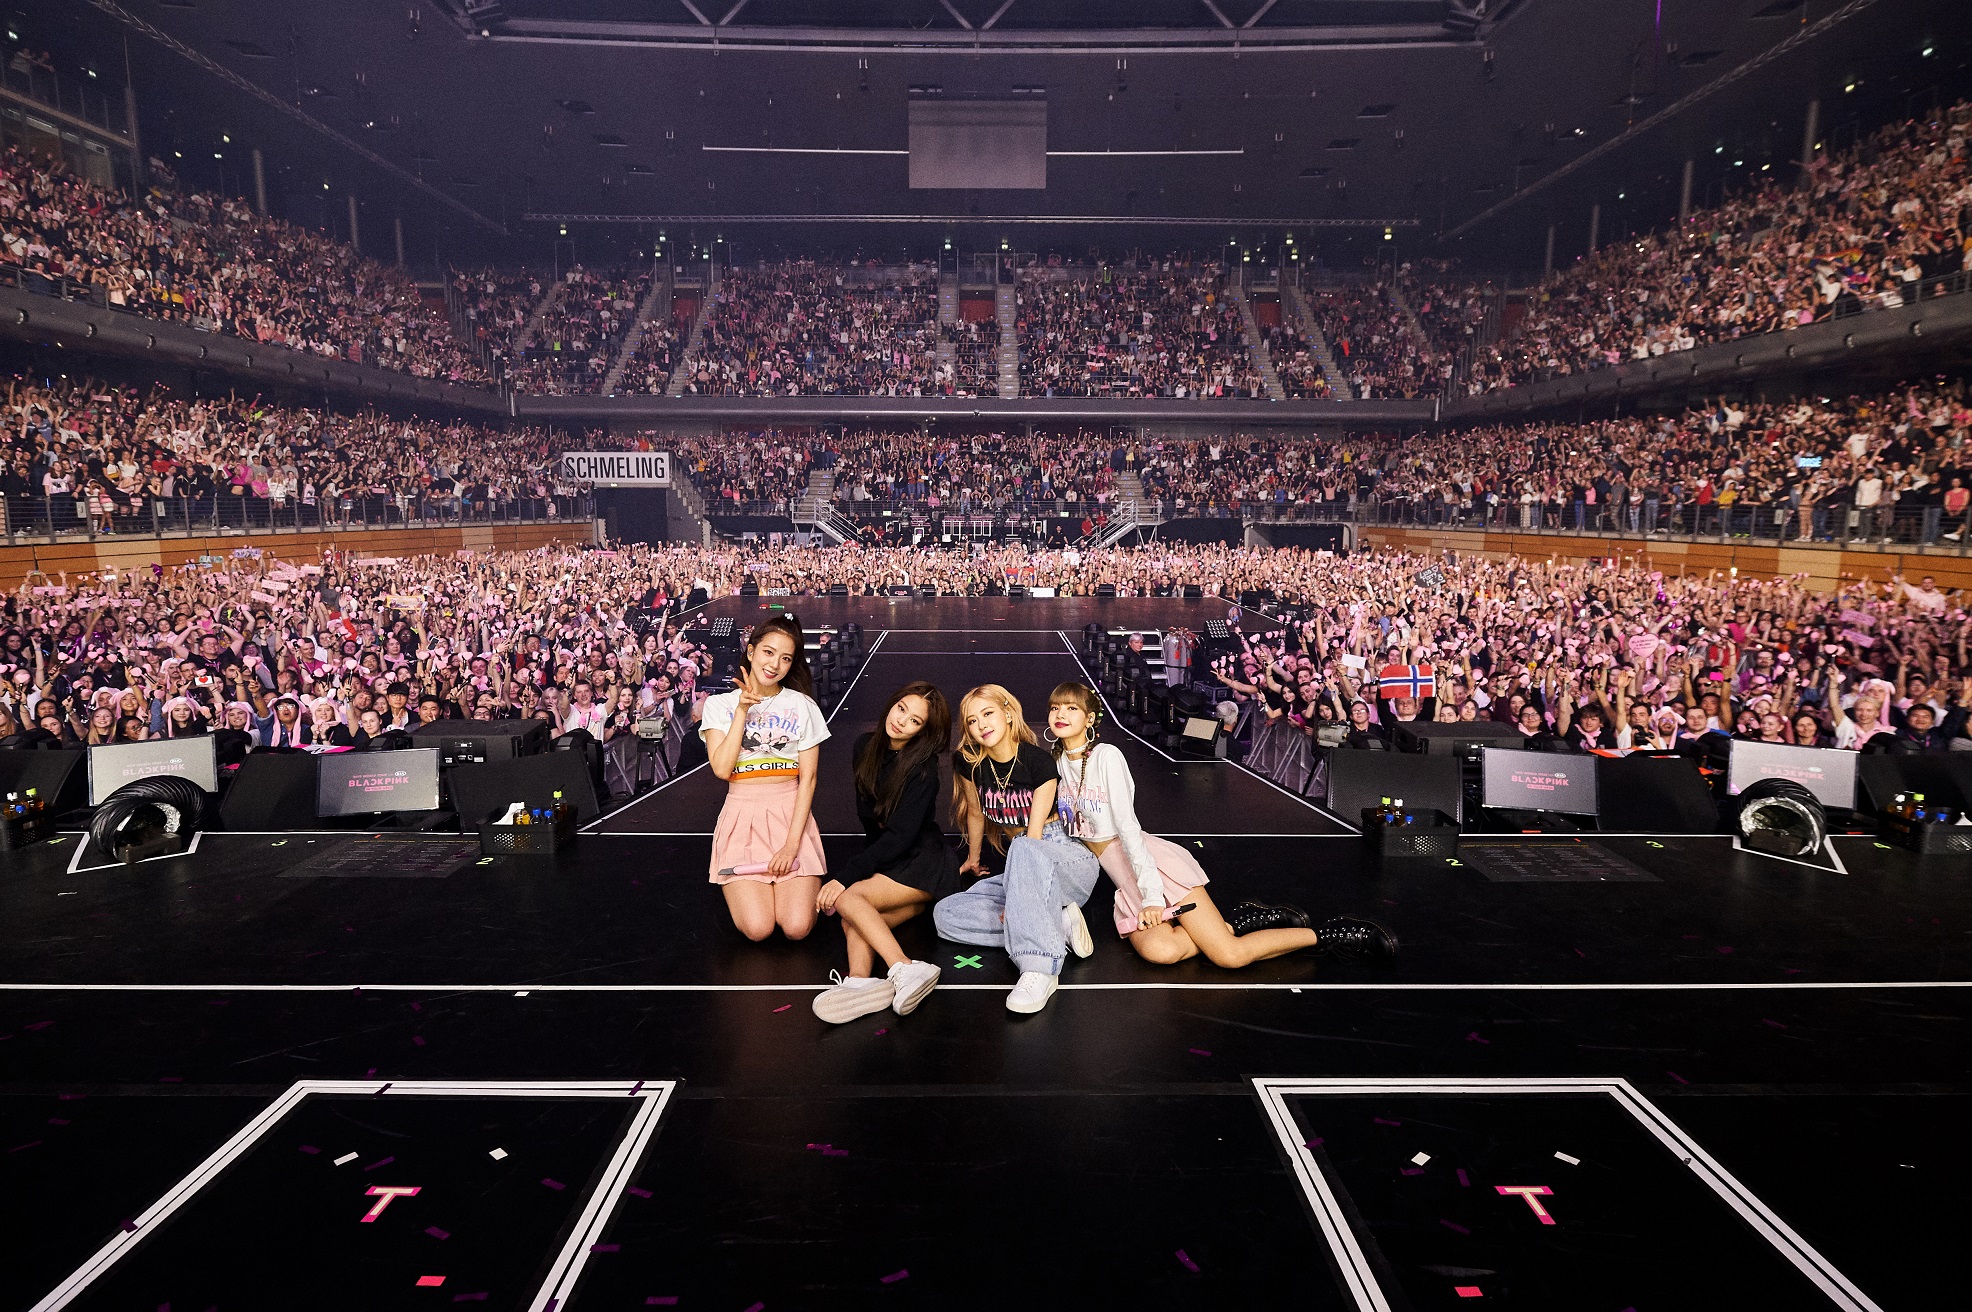 KEXCLUSIVE BLACKPINK made Berlin go crazy pink ⋆ The latest kpop news and music Officially